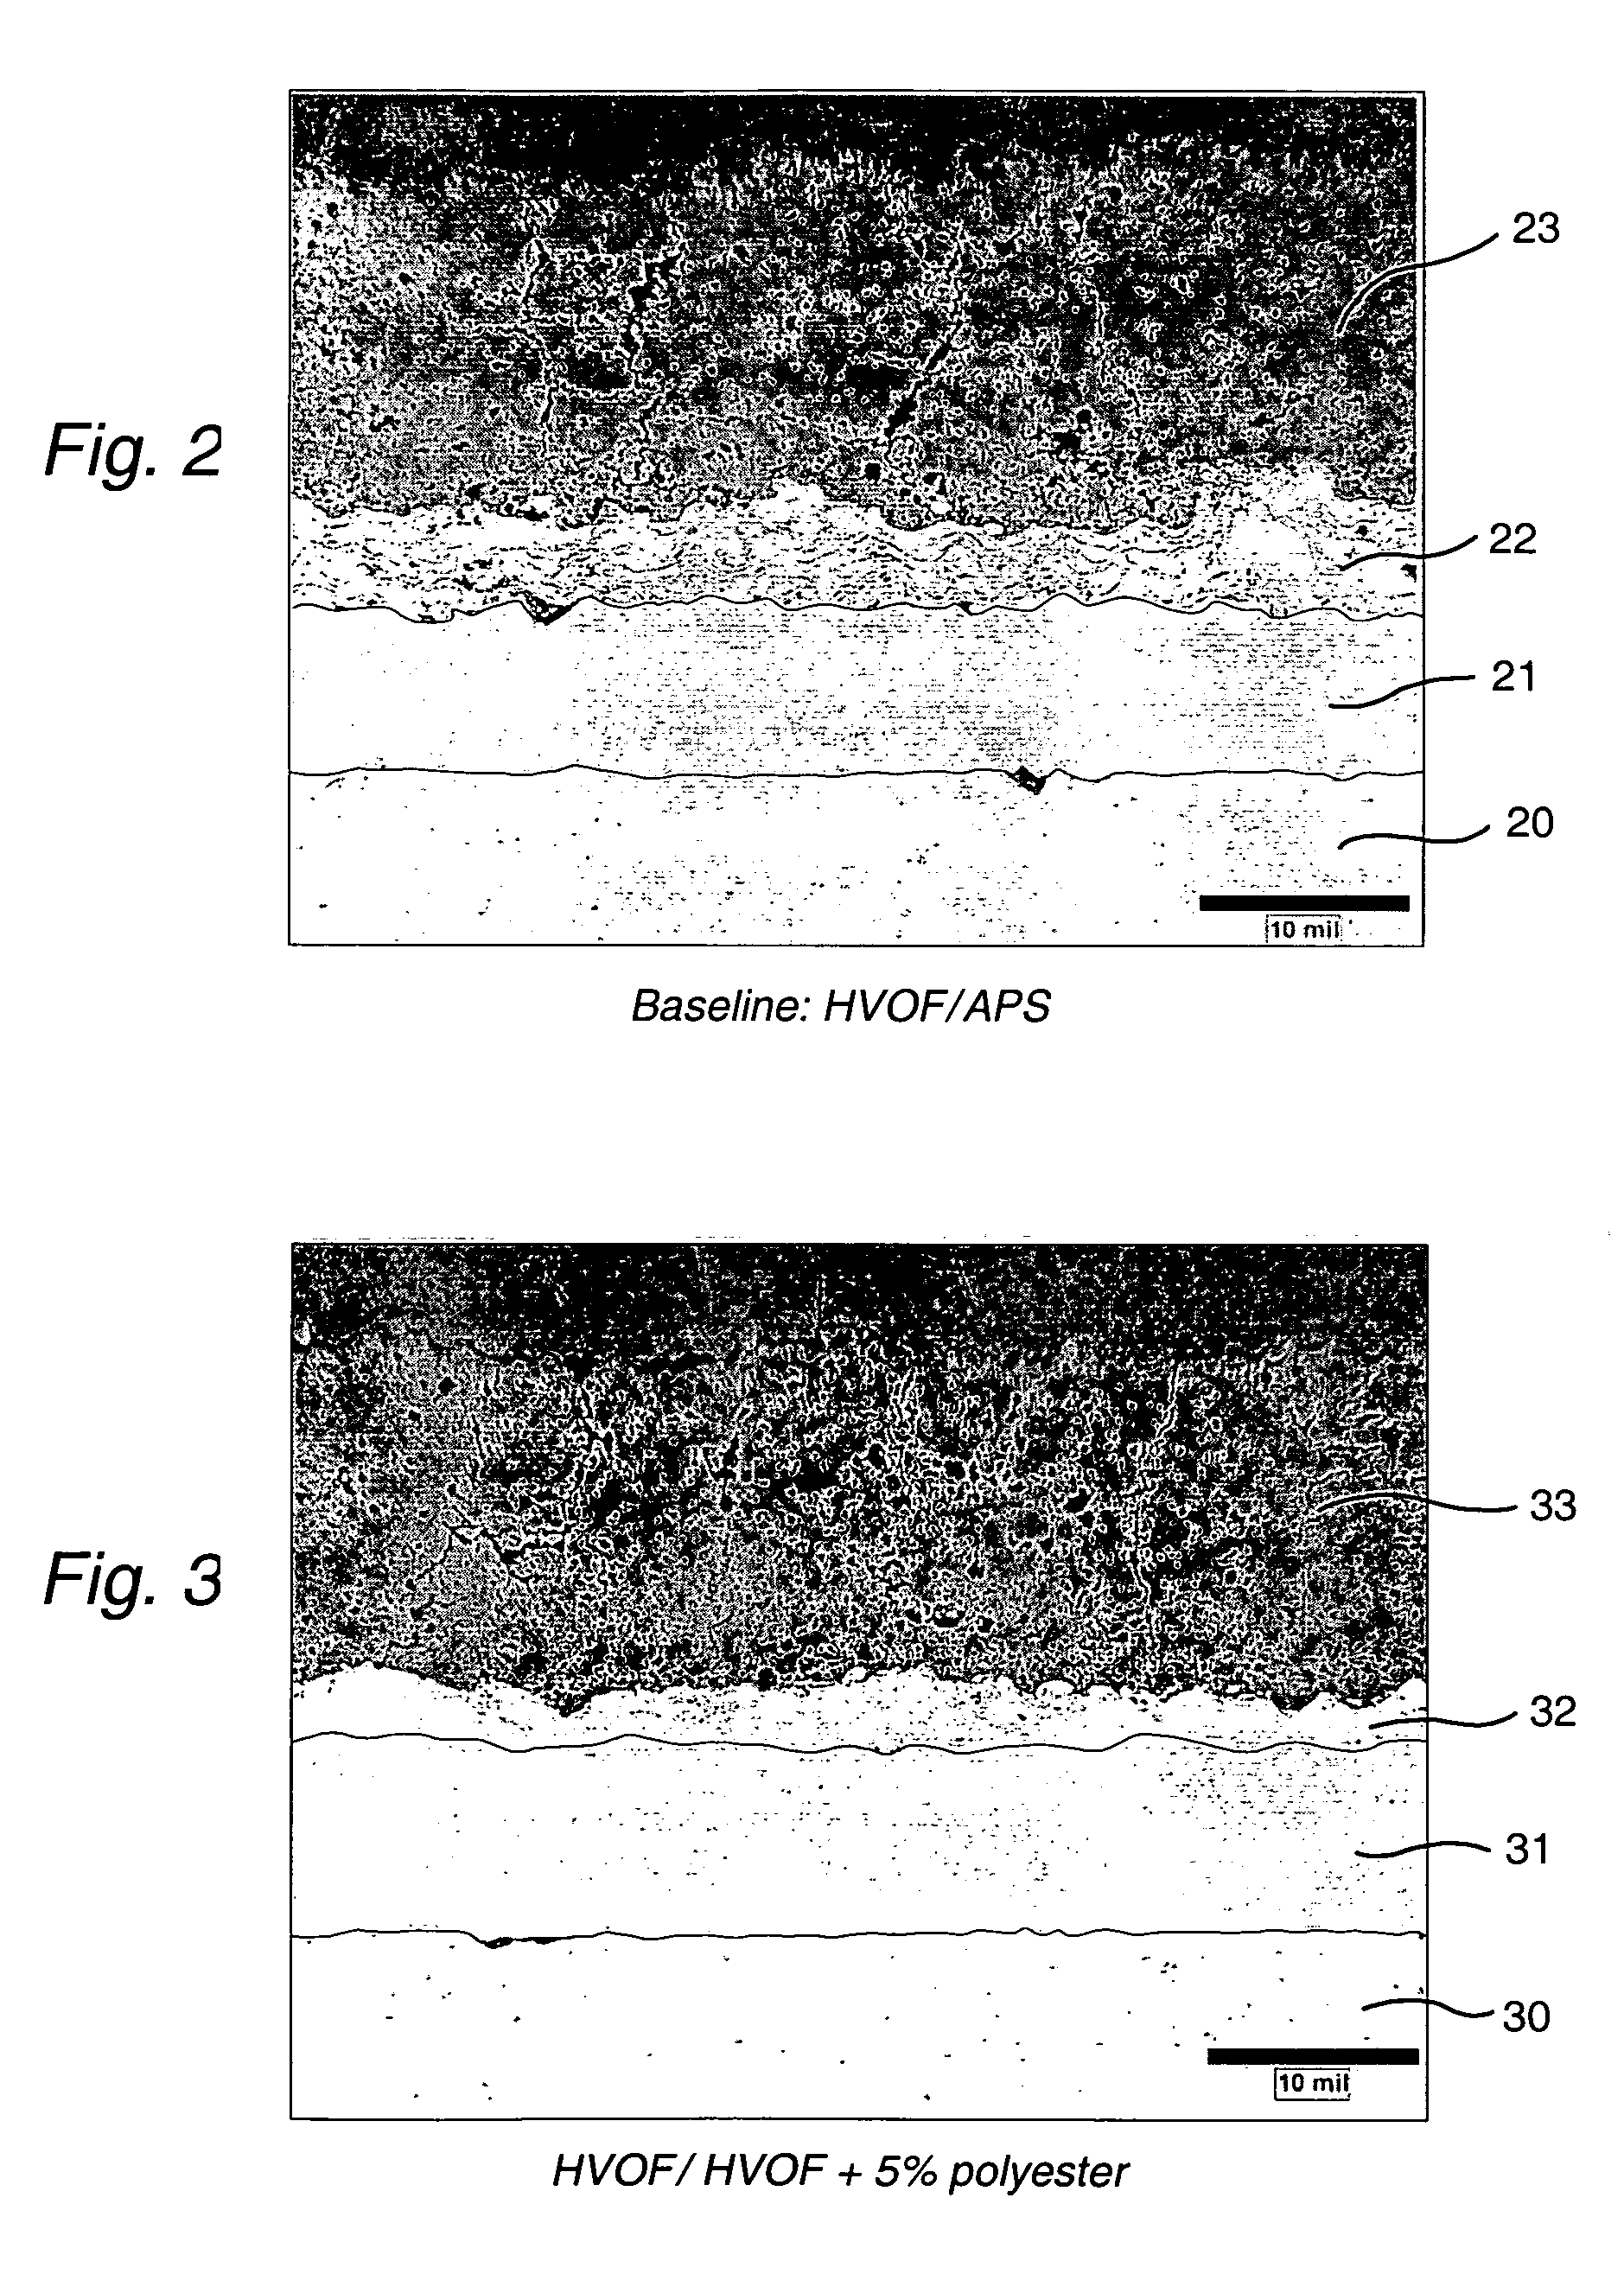 Bi-layer HVOF coating with controlled porosity for use in thermal barrier coatings